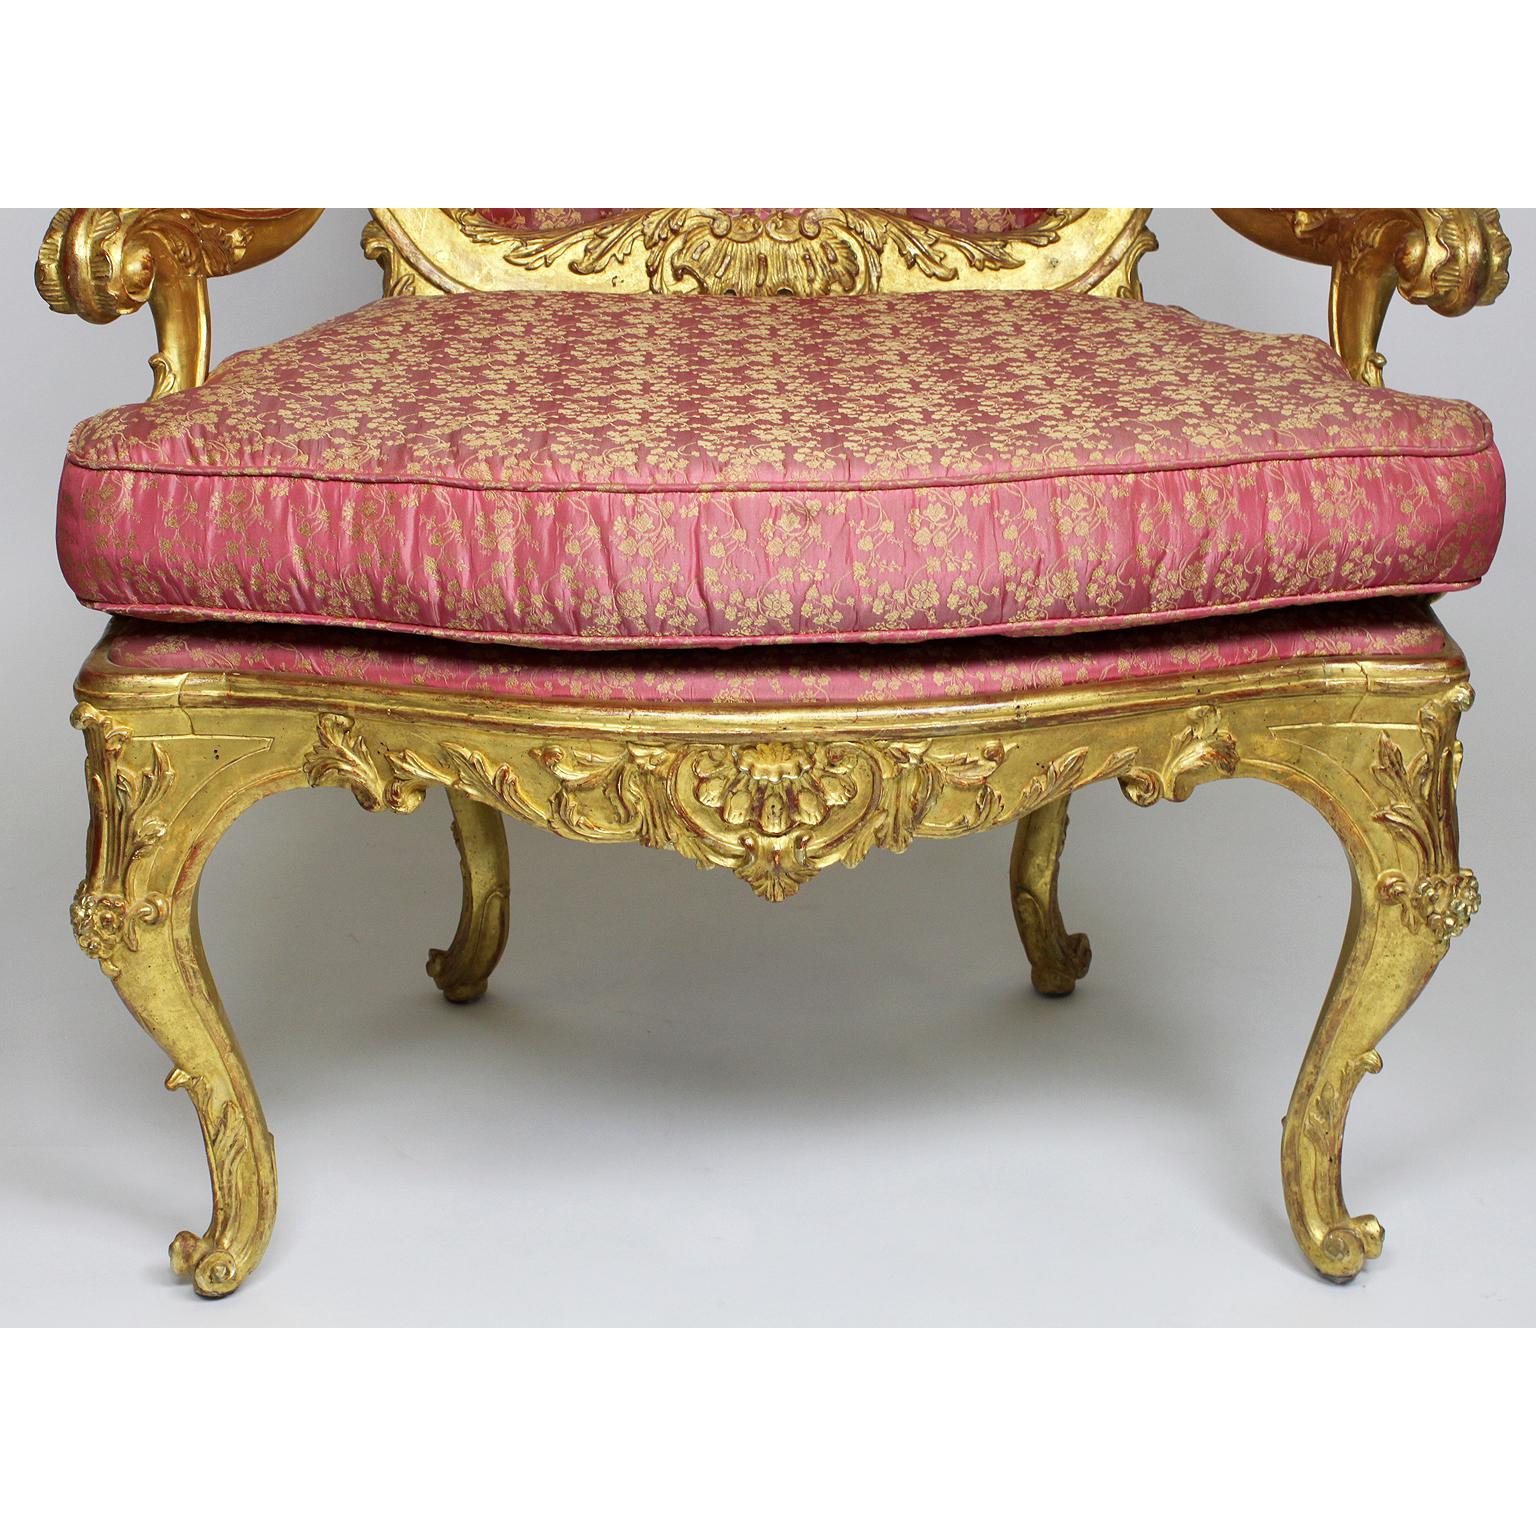 Pair of Italian Venetian Rococo Revival Style Giltwood Carved Throne Armchairs For Sale 4